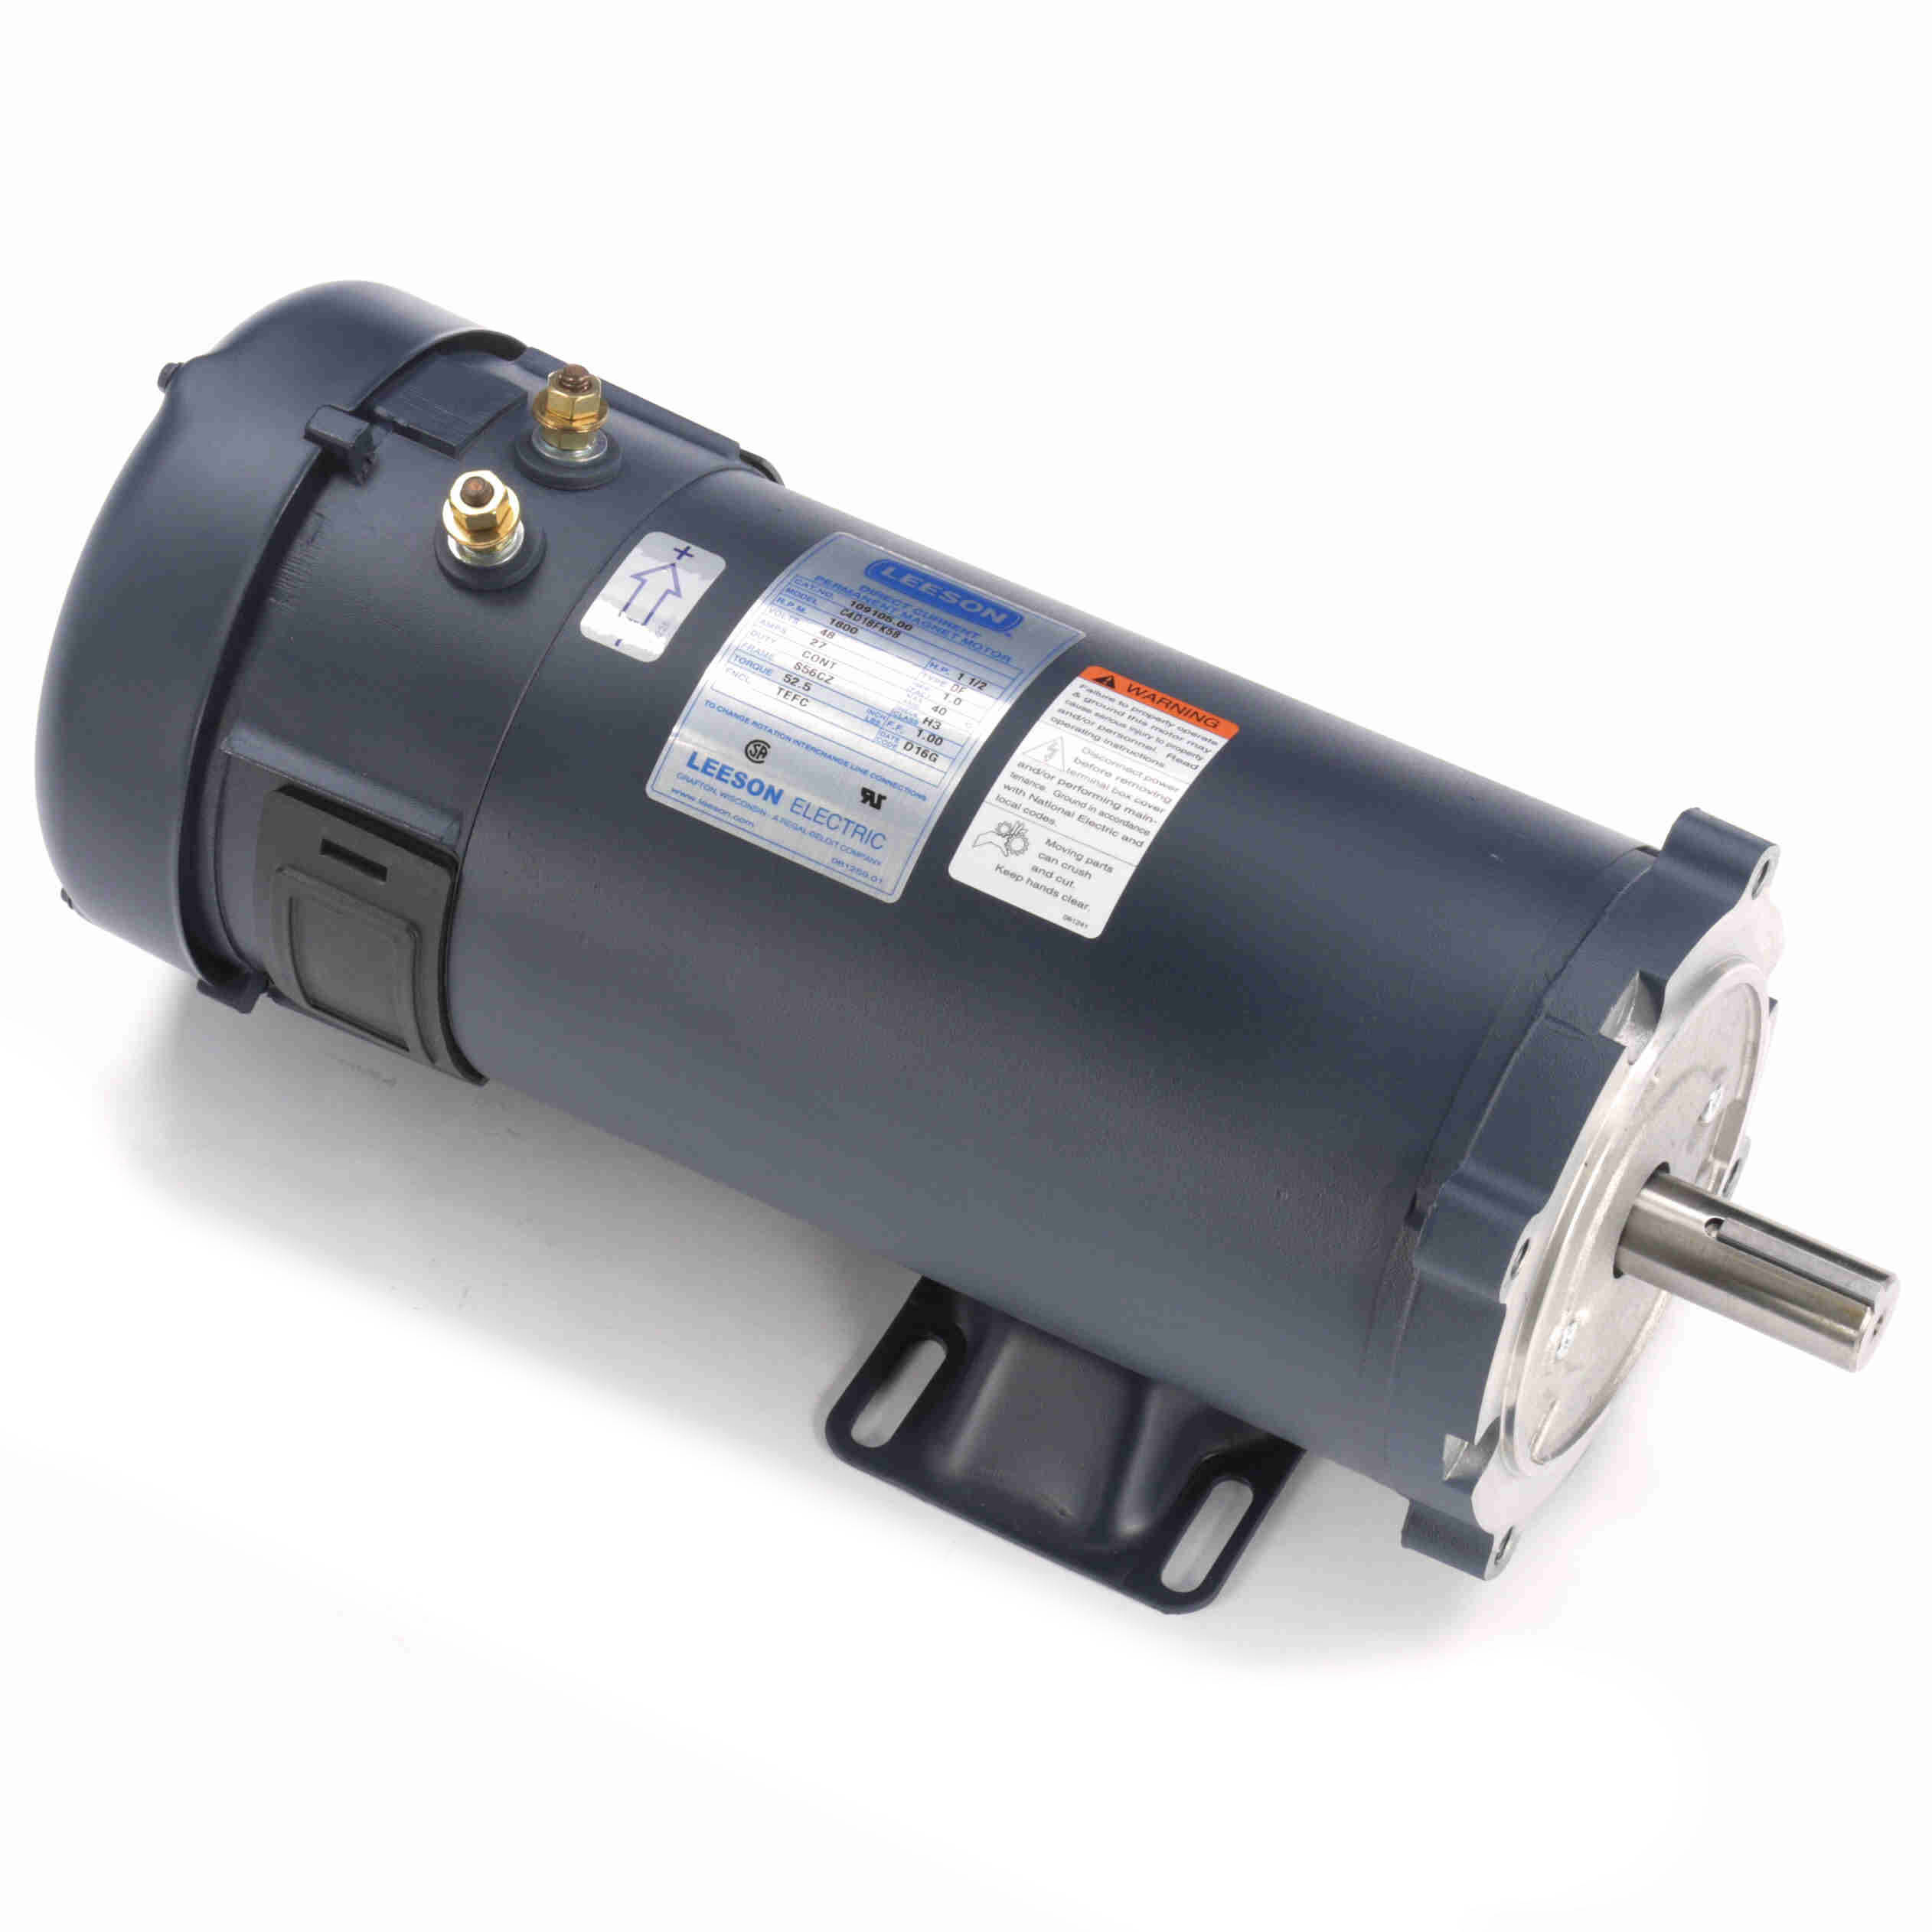 109105.00 Leeson 1.5HP Low Voltage DC Electric Motor, 1800RPM 4